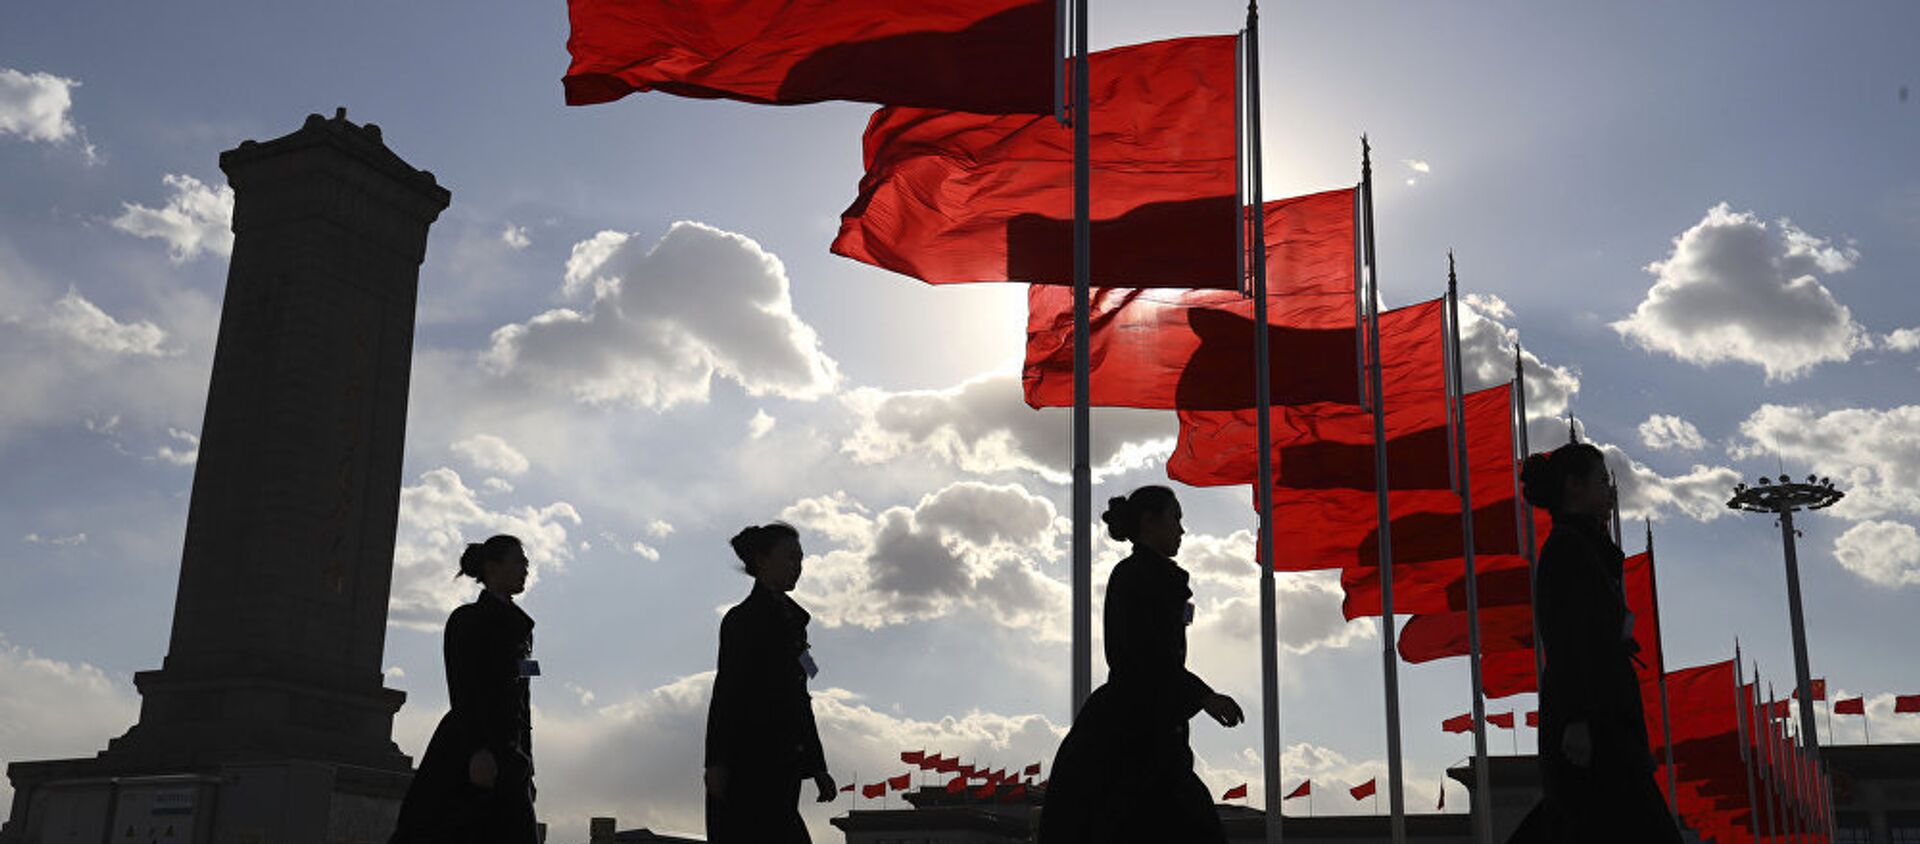 Bus ushers walk past red flags on Tiananmen Square during a plenary session of the Chinese People's Political Consultative Conference (CPPCC) at the Great Hall of the People in Beijing - 俄羅斯衛星通訊社, 1920, 03.12.2021